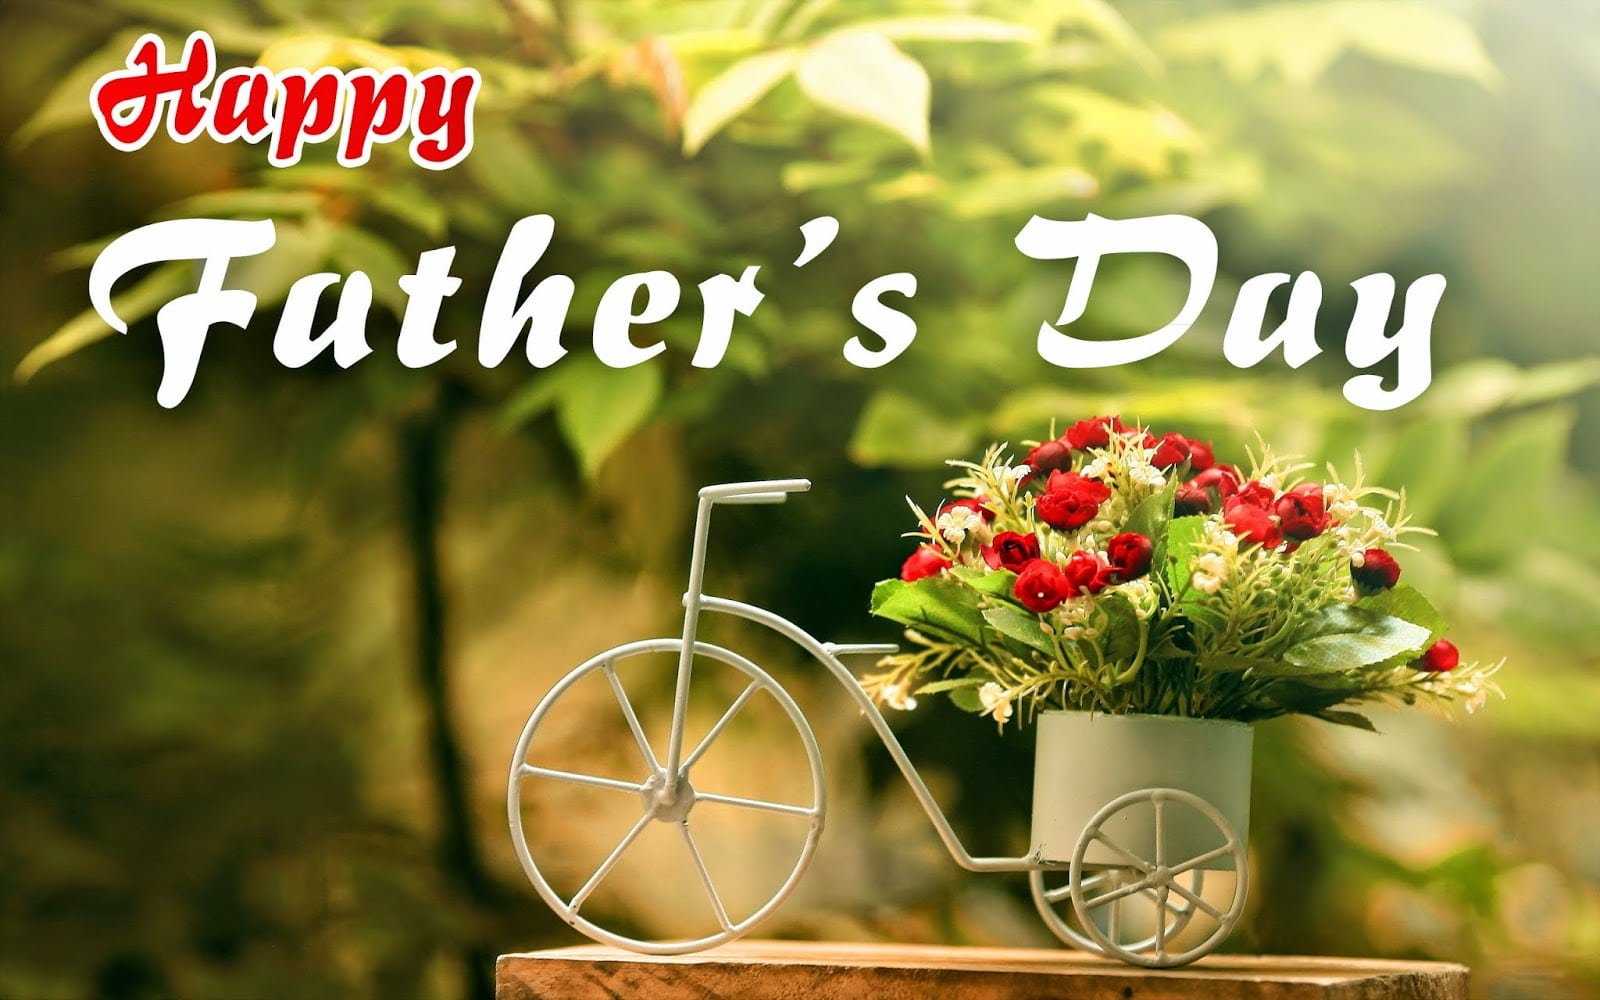 2022] Happy Fathers Day images : Pics, GIF, Dp For Whatsapp & FB